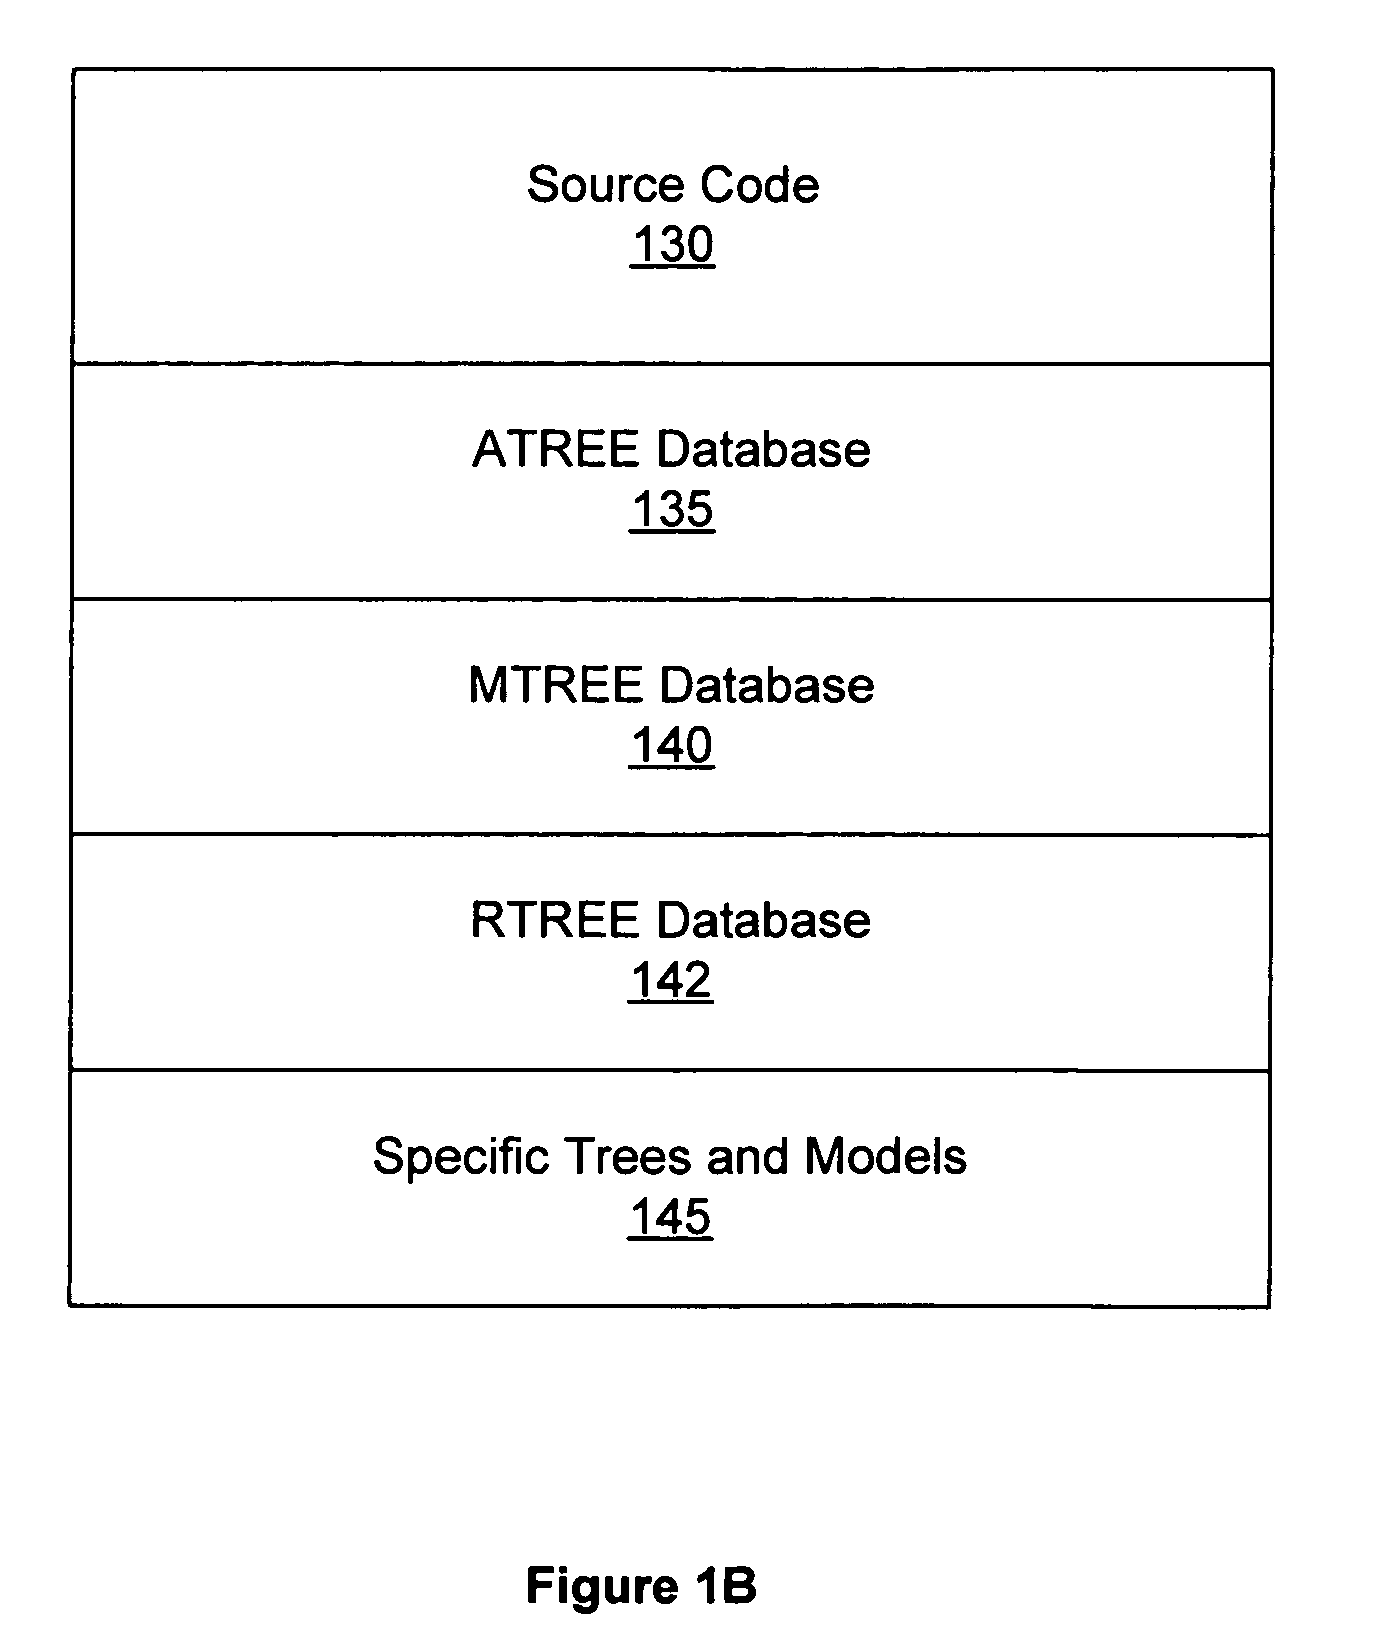 Building integrated circuits using a common database